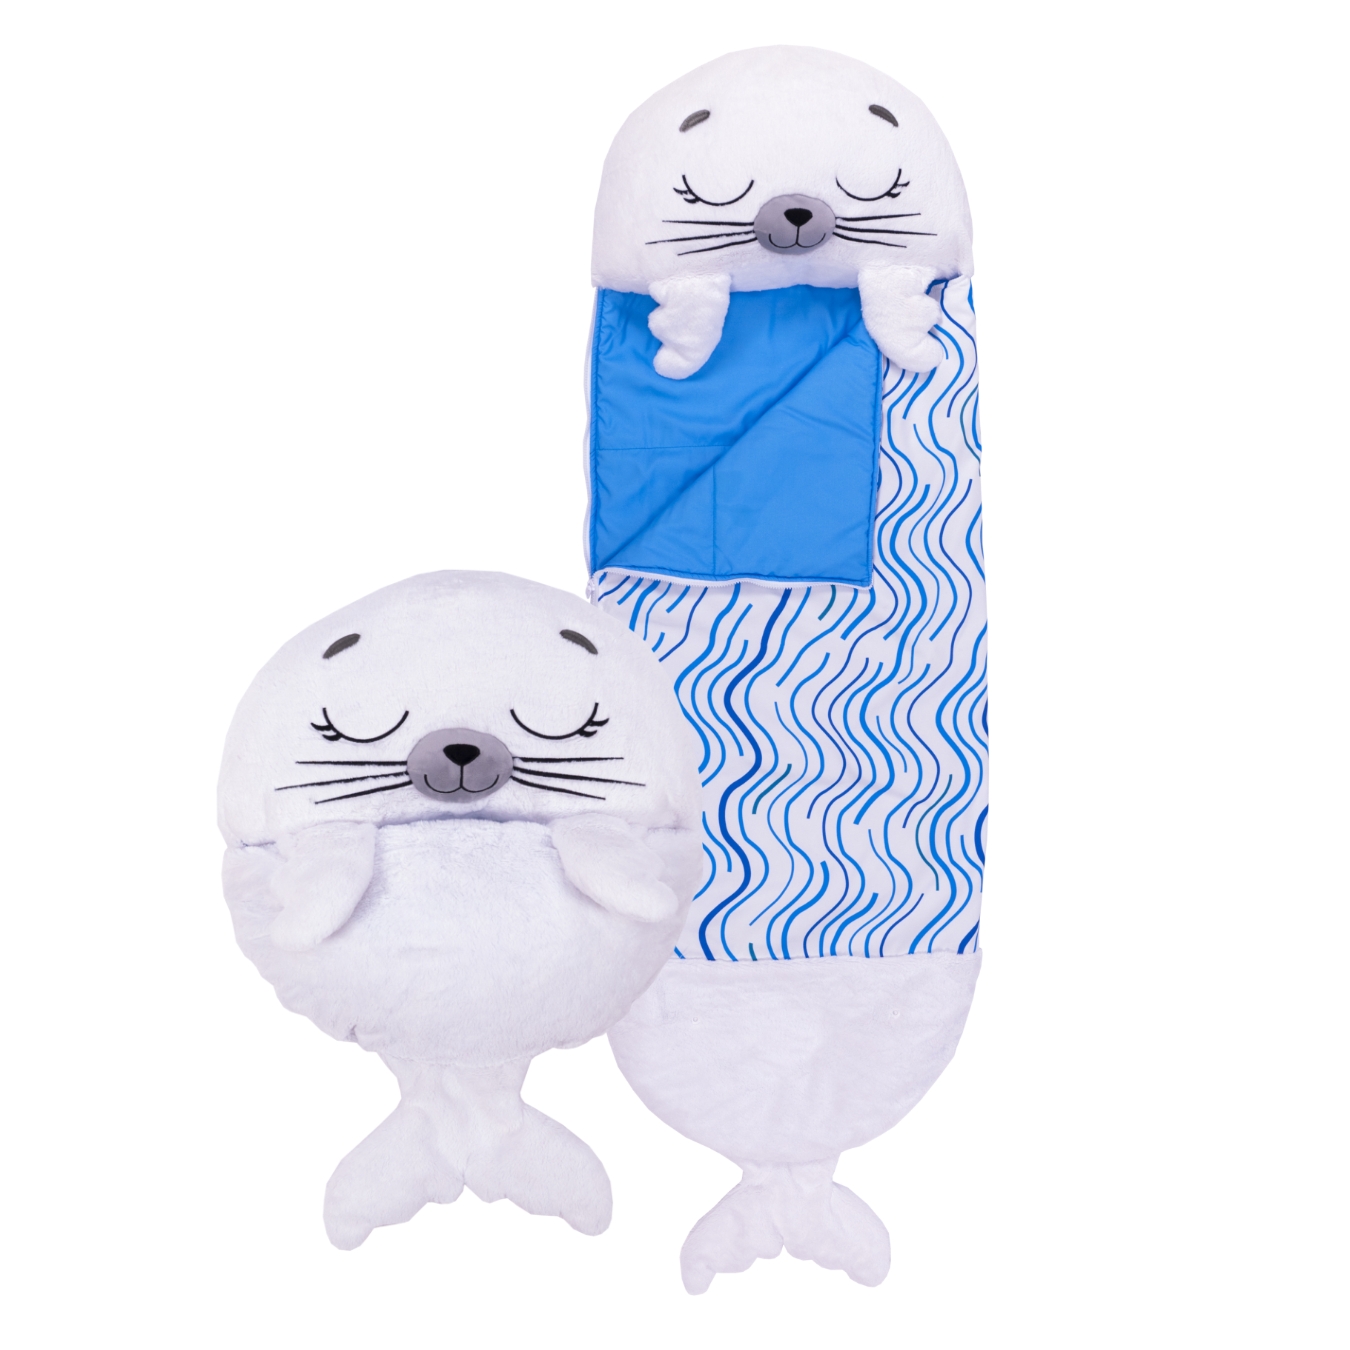 View Happy Nappers White Seal Medium Ages 3 To 6 Plush Toy That Opens To A Fun Sleeping Bag High Street TV information